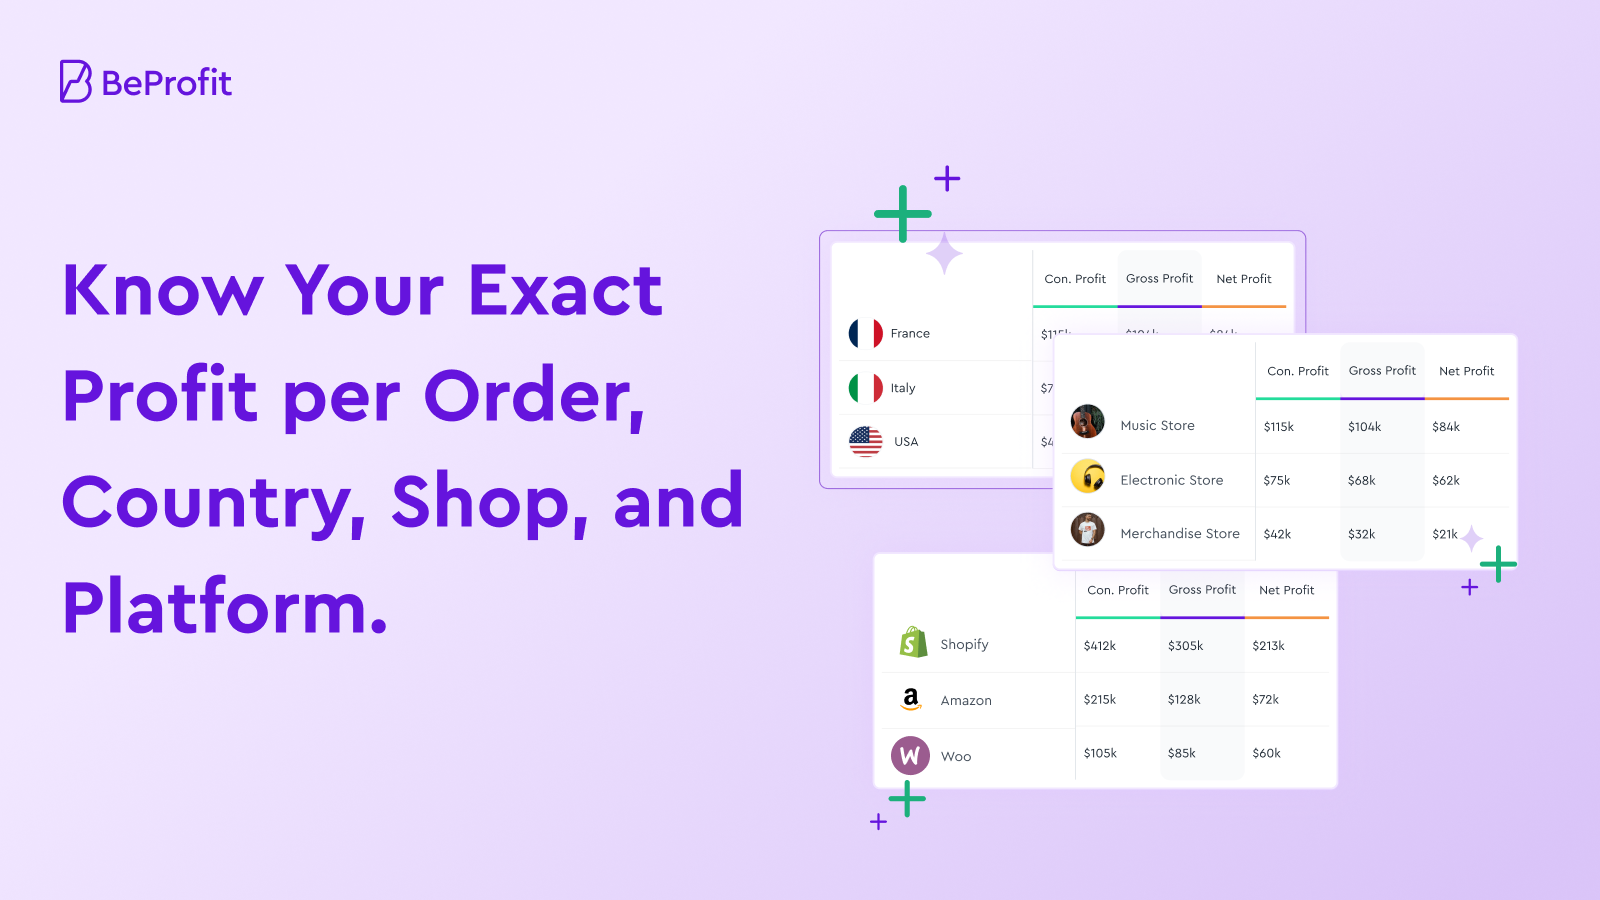 Know your exact profit per order, country, shop, and platform